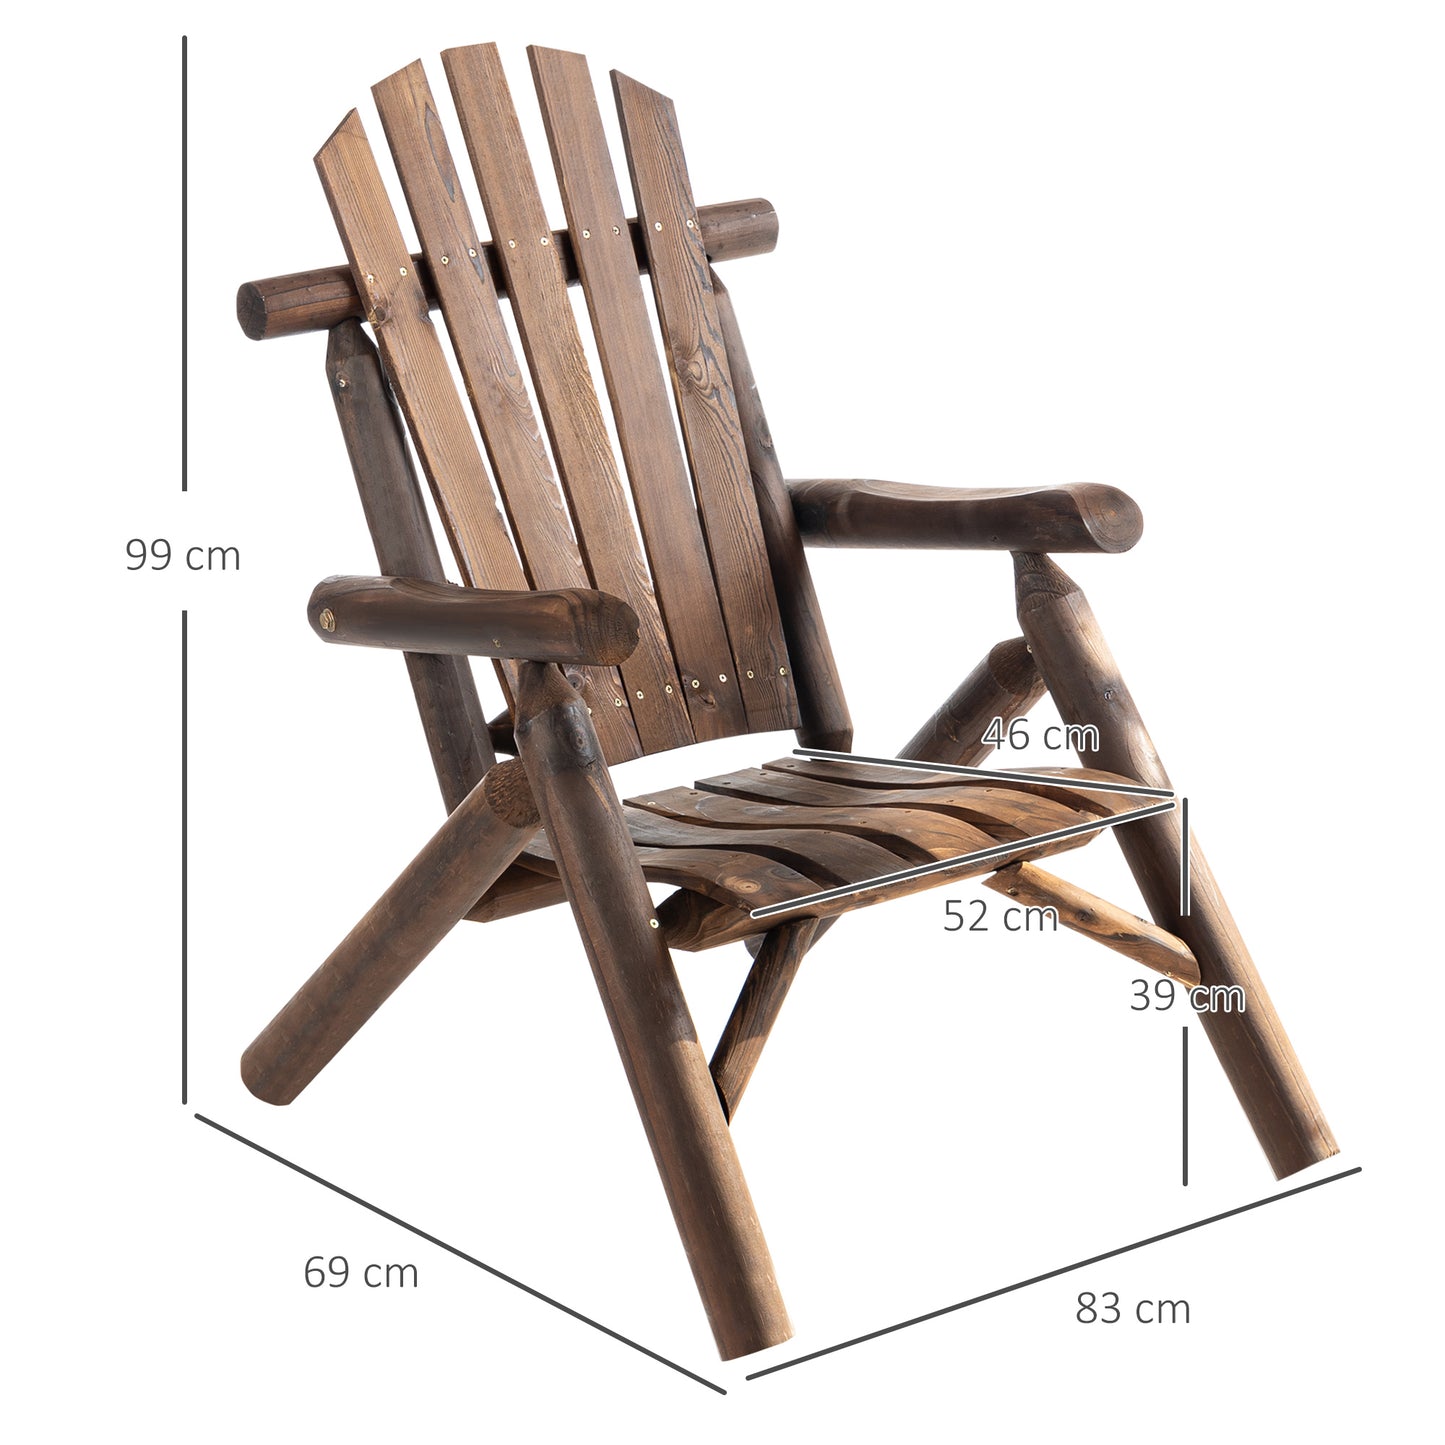 Outsunny Wooden Adirondack Chair Outdoor Patio Lounge Chair with Ergonomic Design and Fir Wood Frame, Carbonized Color